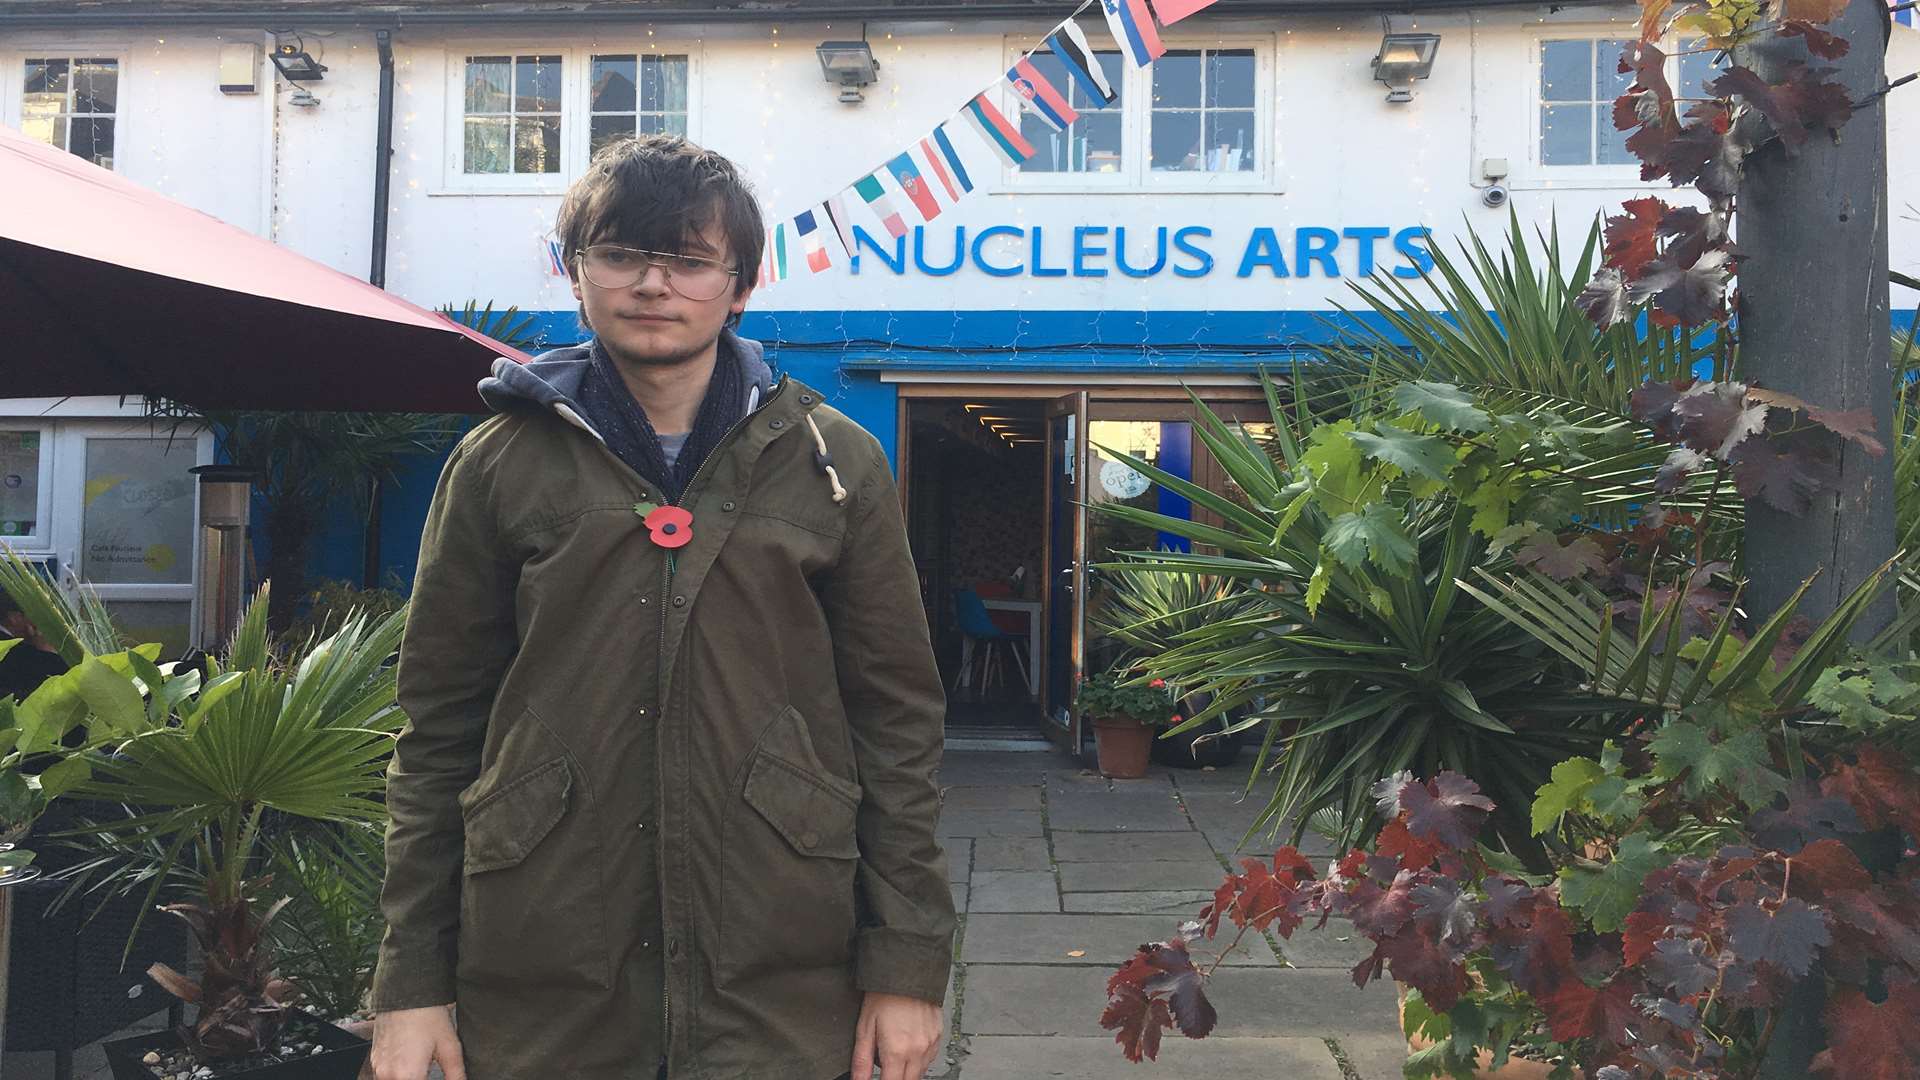 Steven Moon was an 'amazing help' at Nucleus Arts